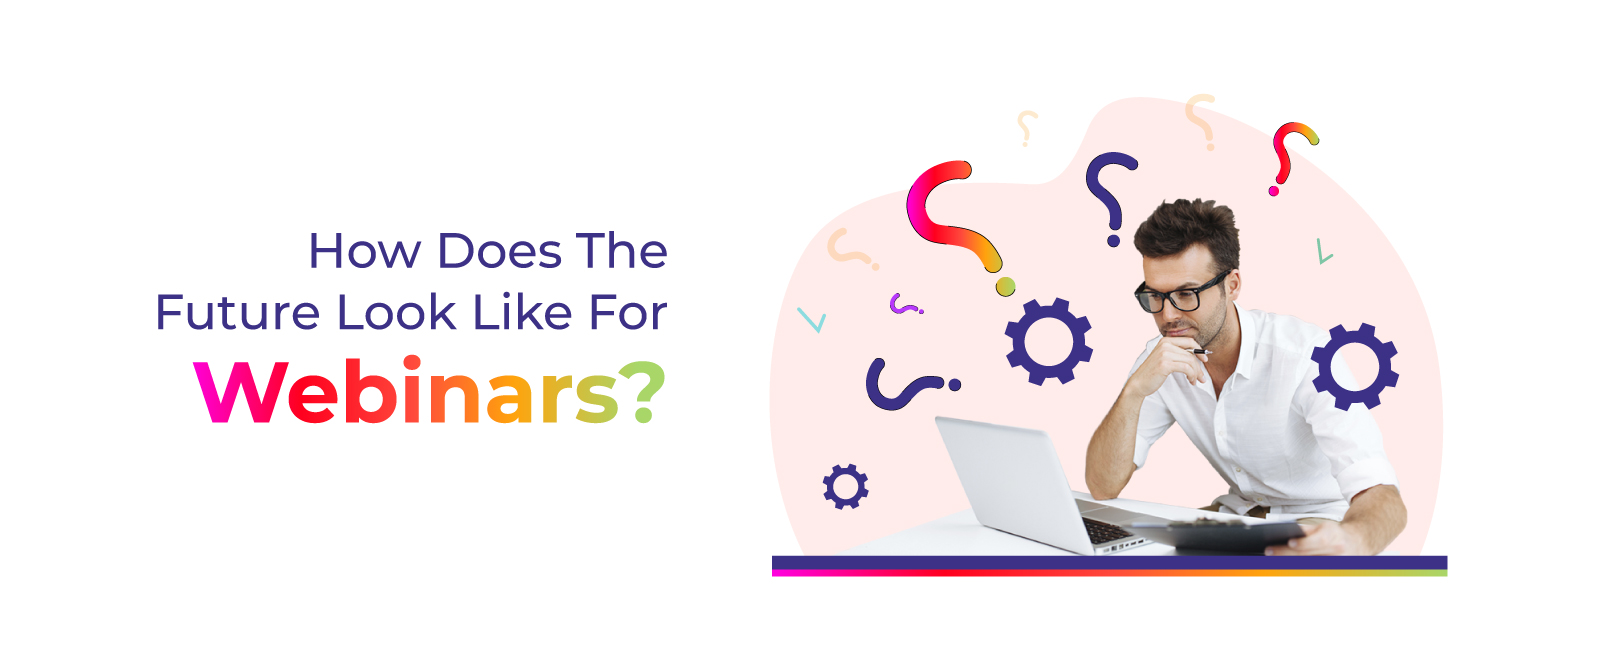 How Does the Future Look Like For Webinars?